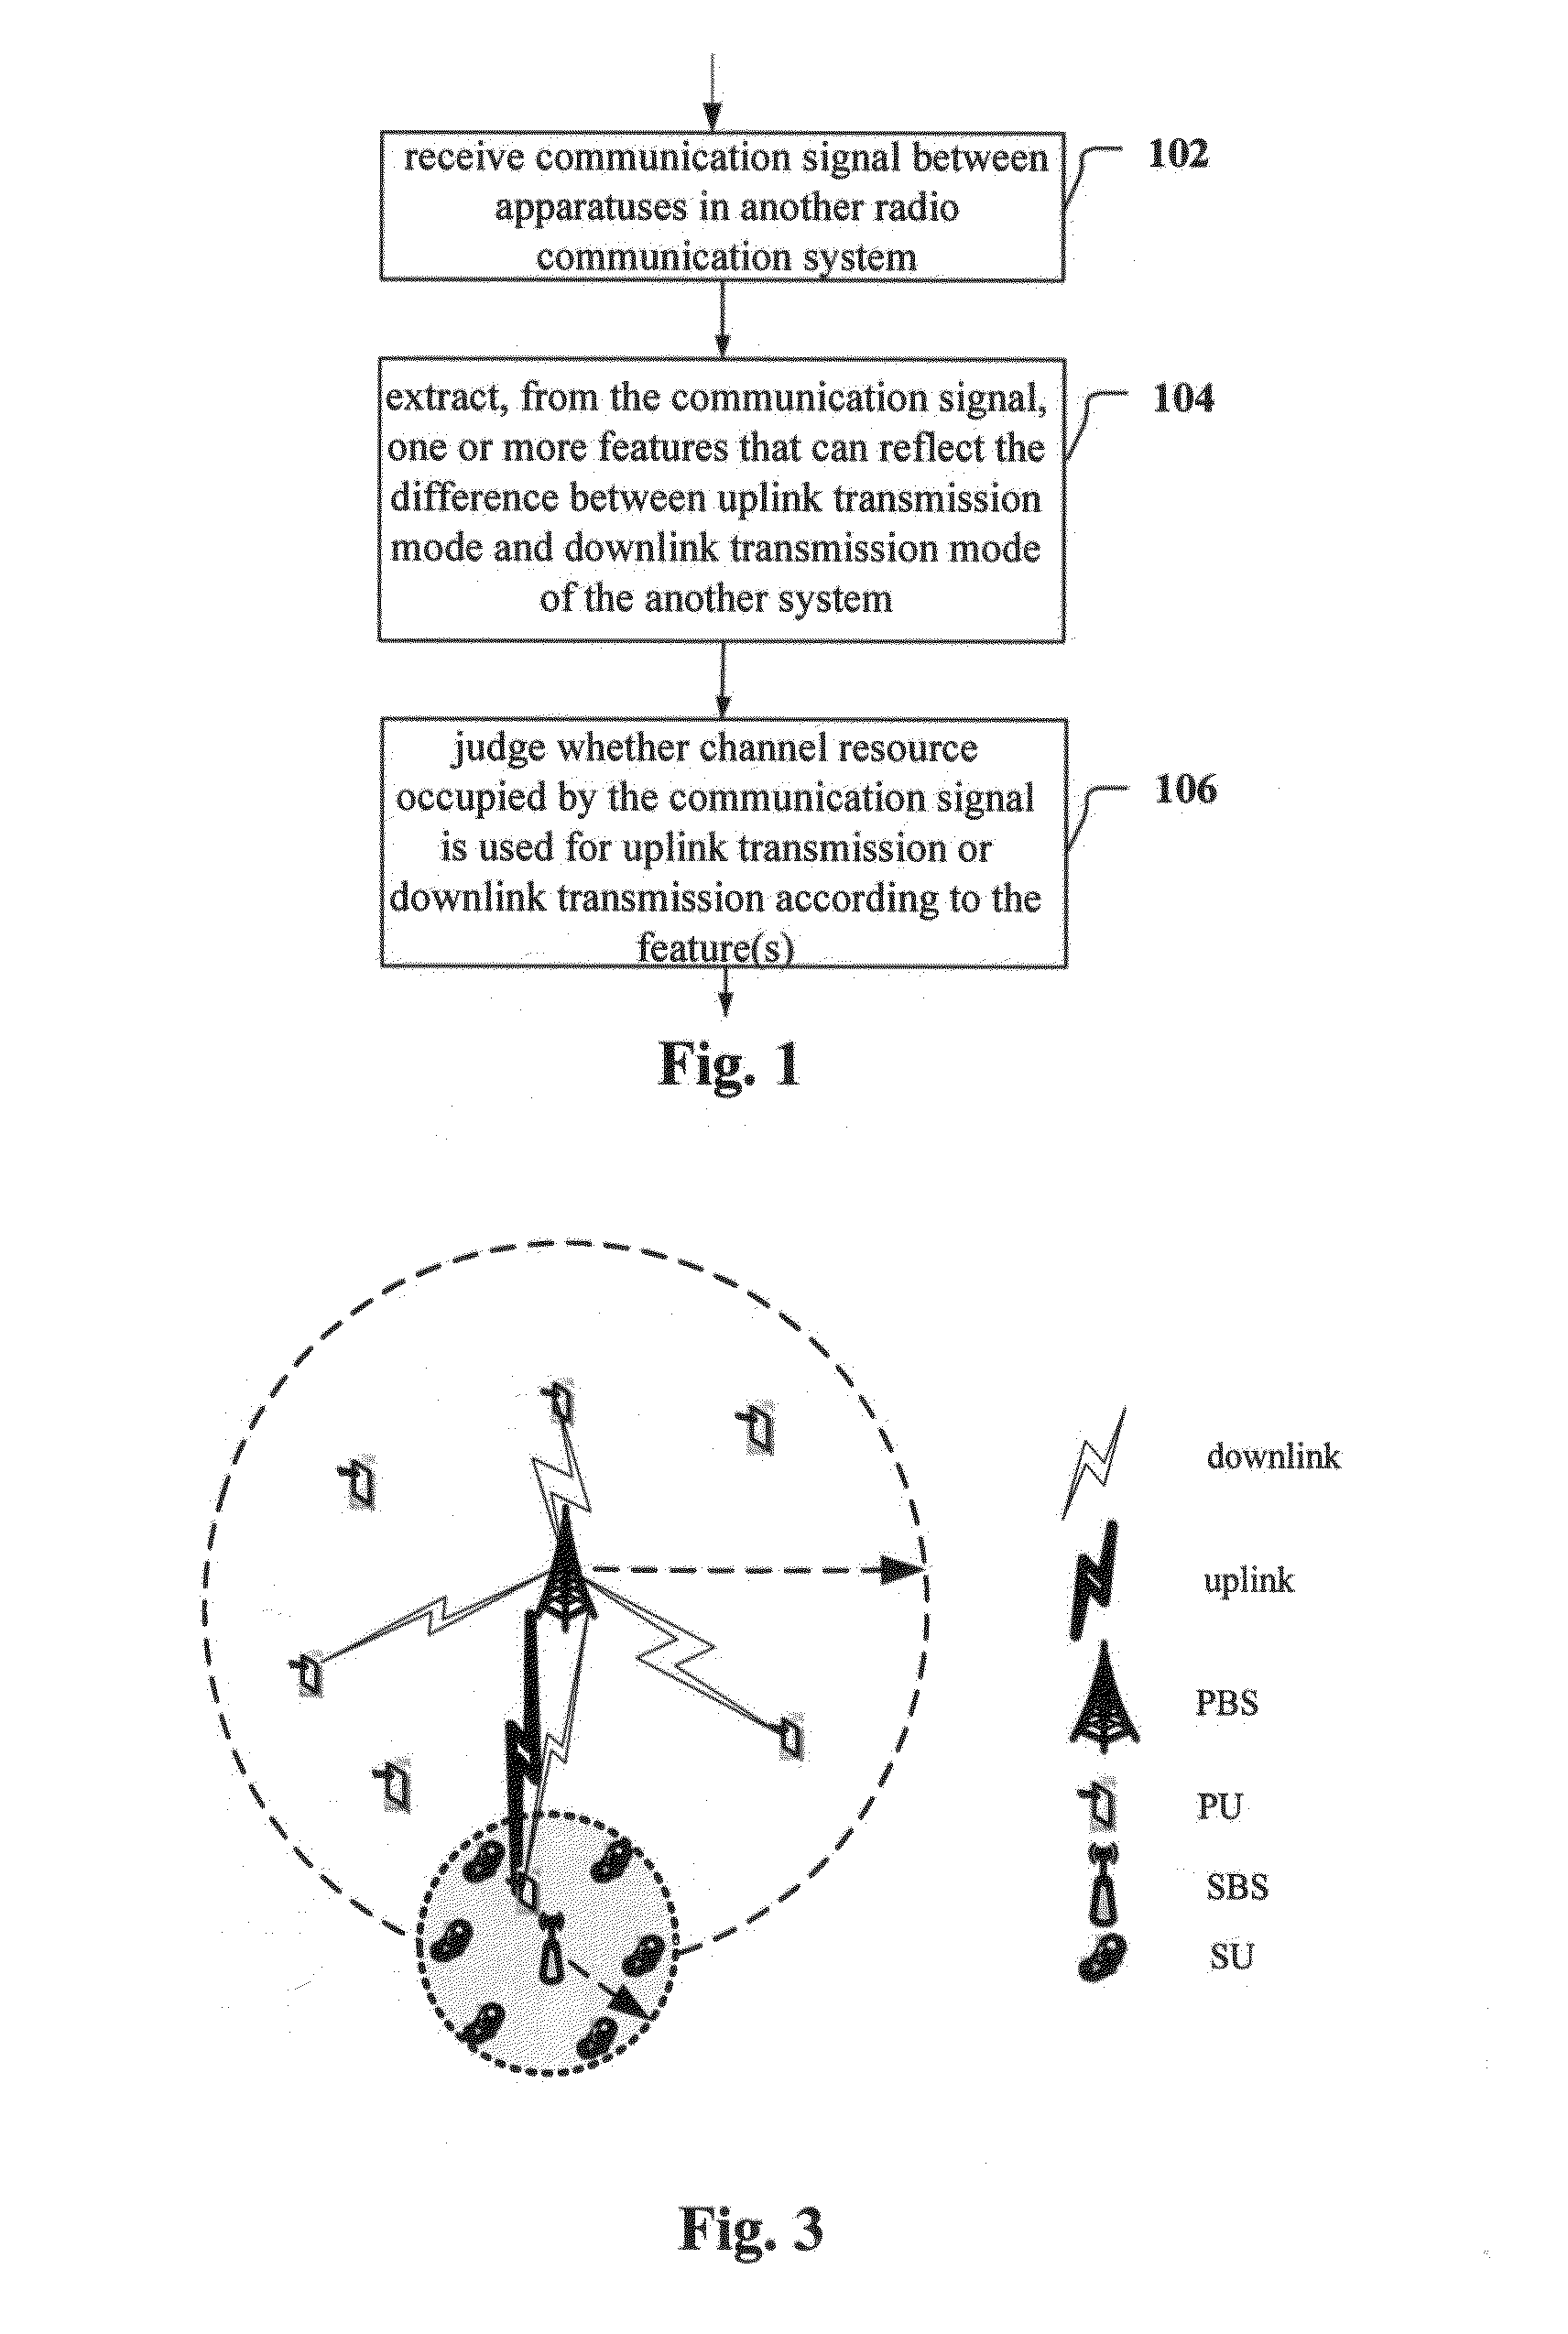 Electronic device, method and computer-readable medium for sensing spectrum usage in a cognitive radio communication system